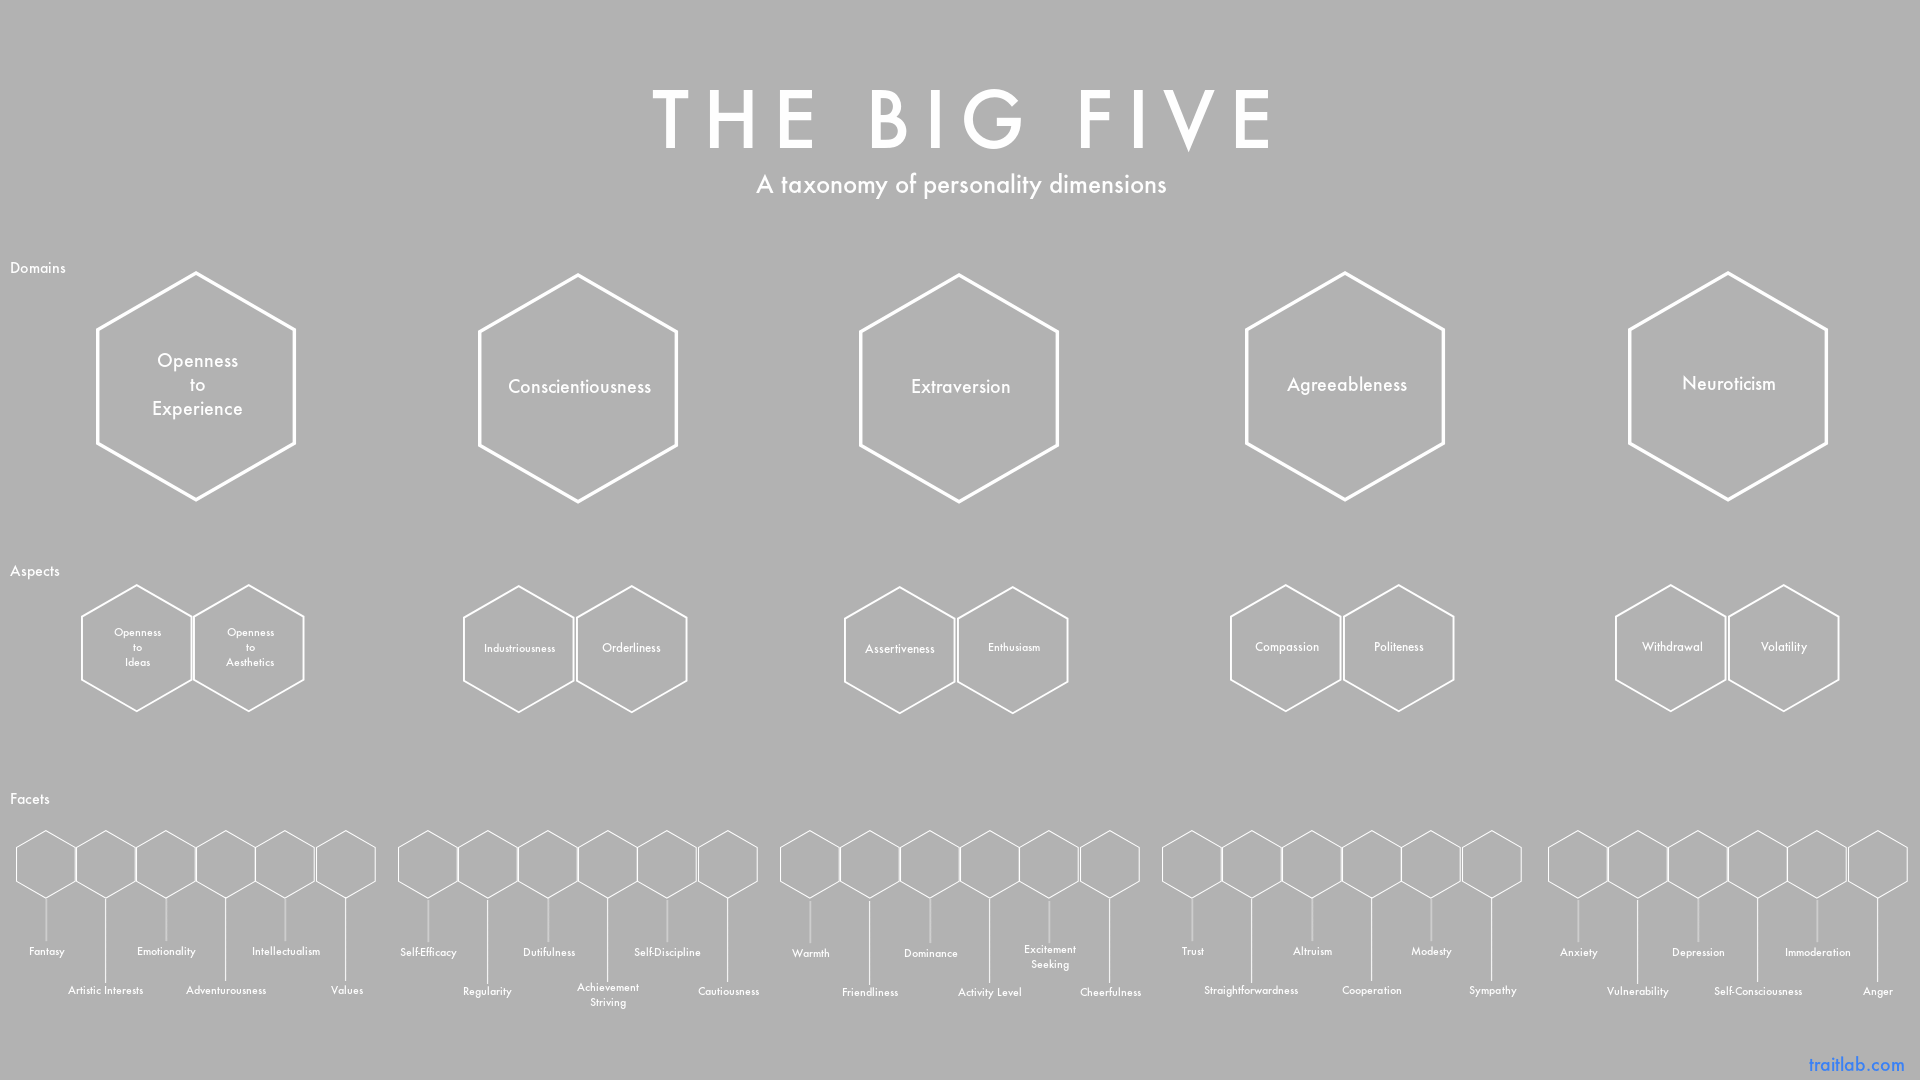 The Big Five personality framework includes domains, aspects, and facets